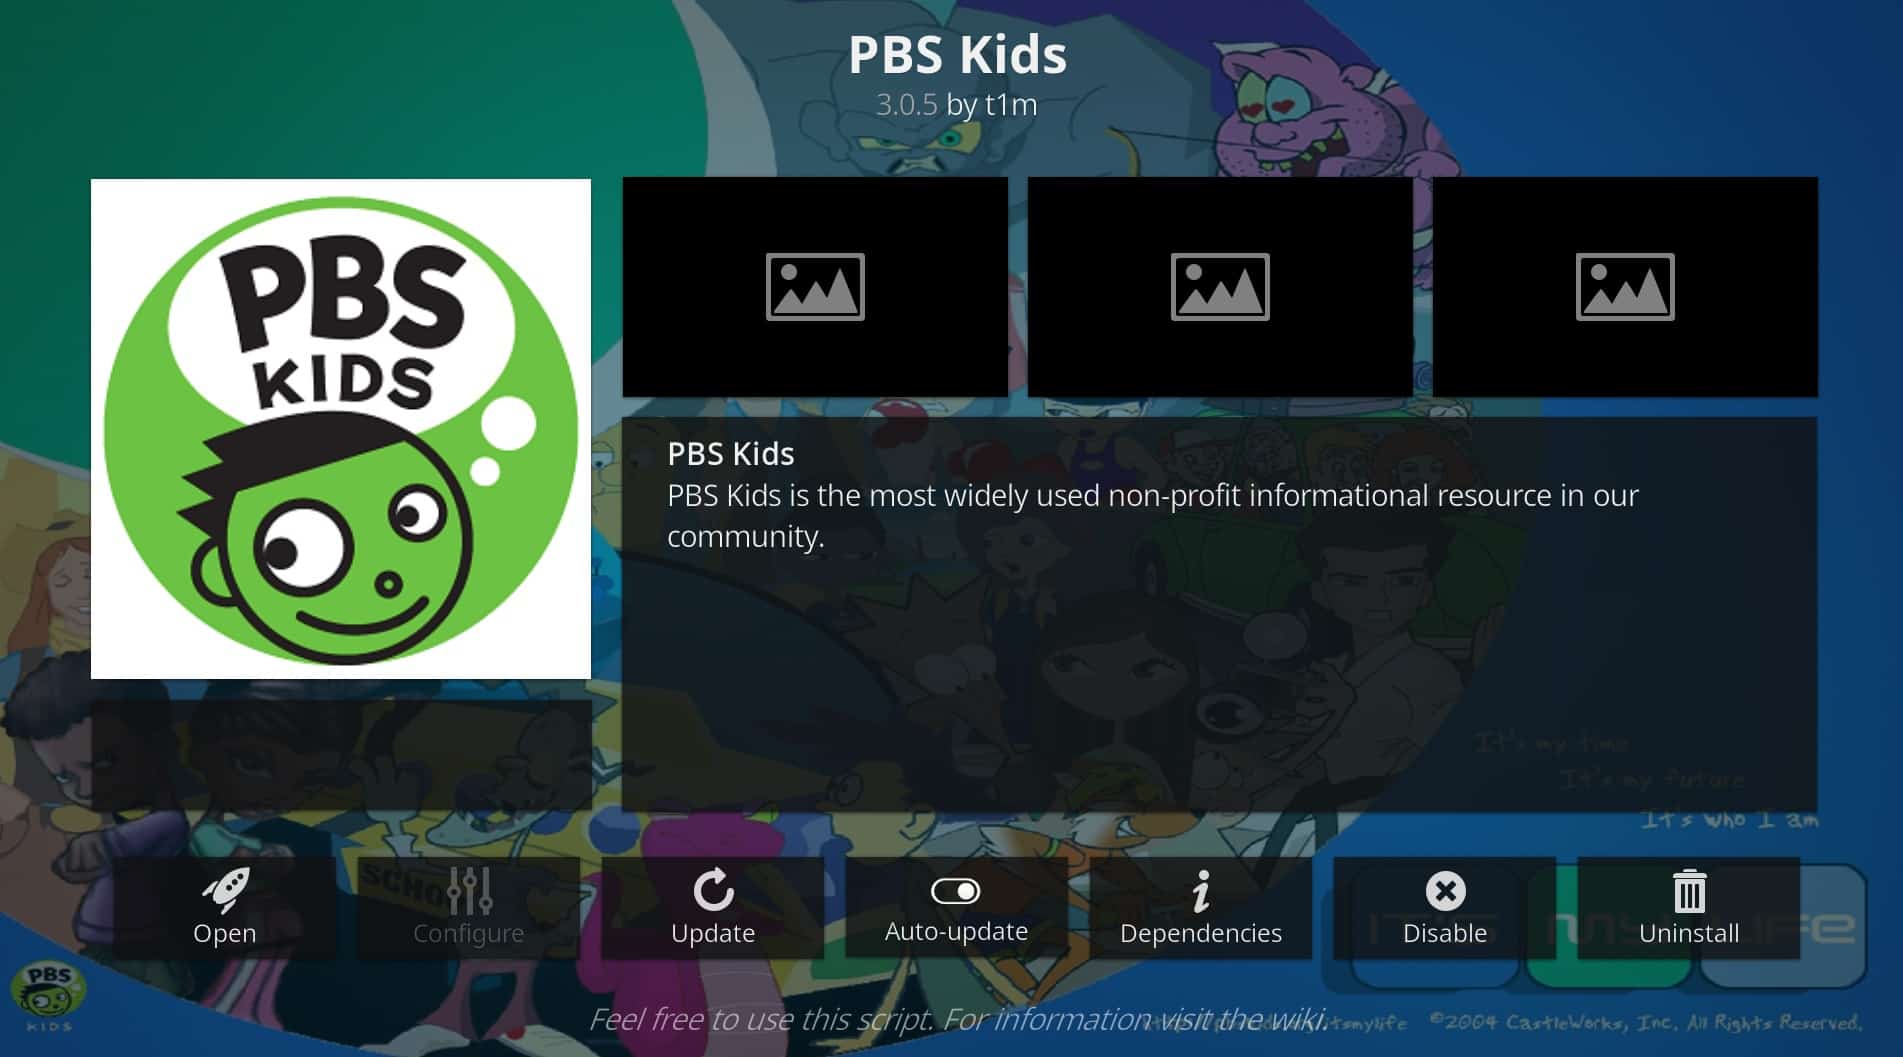 How to install the PBS Kids Kodi add on